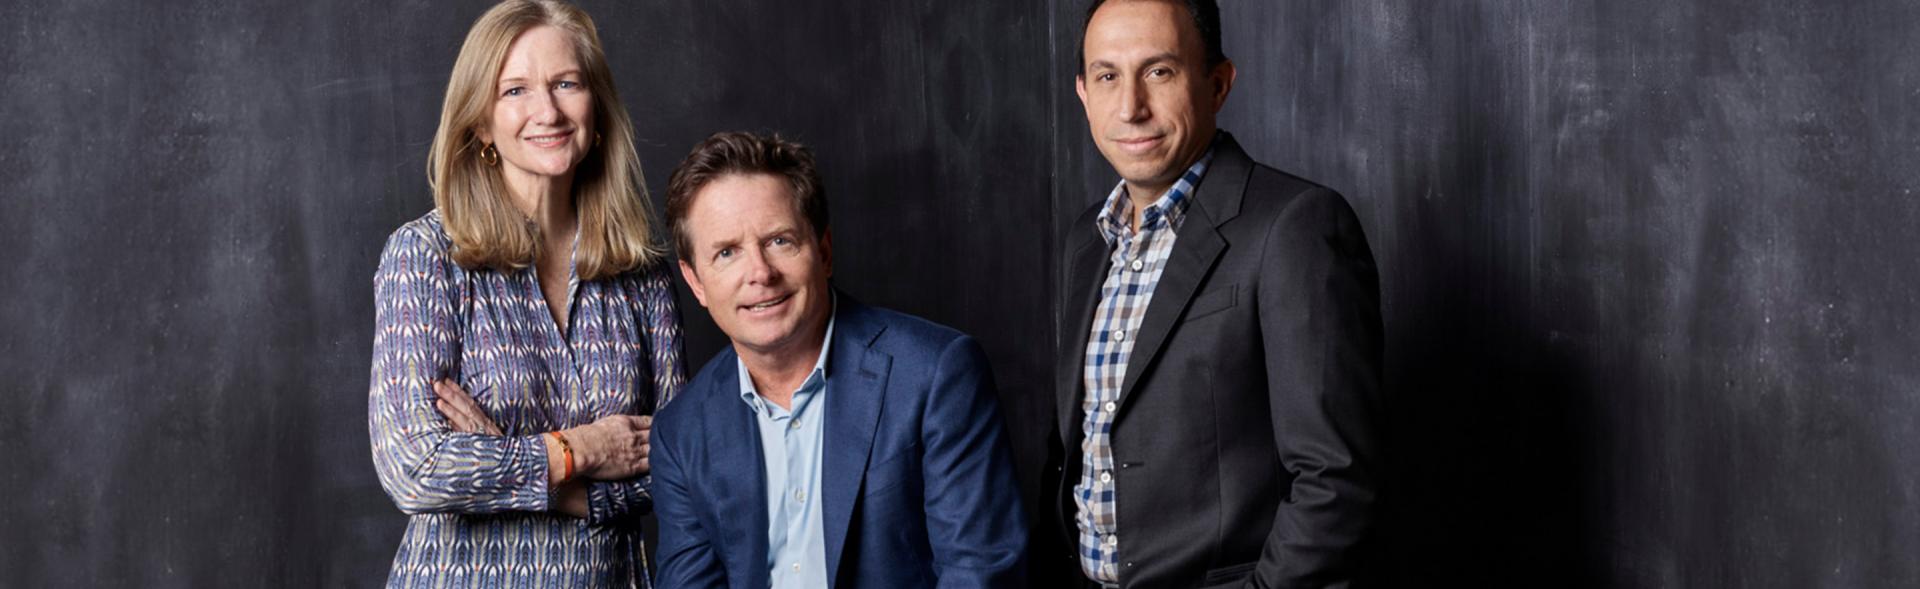 Co-Founder Deborah W. Brooks, Founder Michael J. Fox and Executive Vice President of Research Strategy Todd Sherer